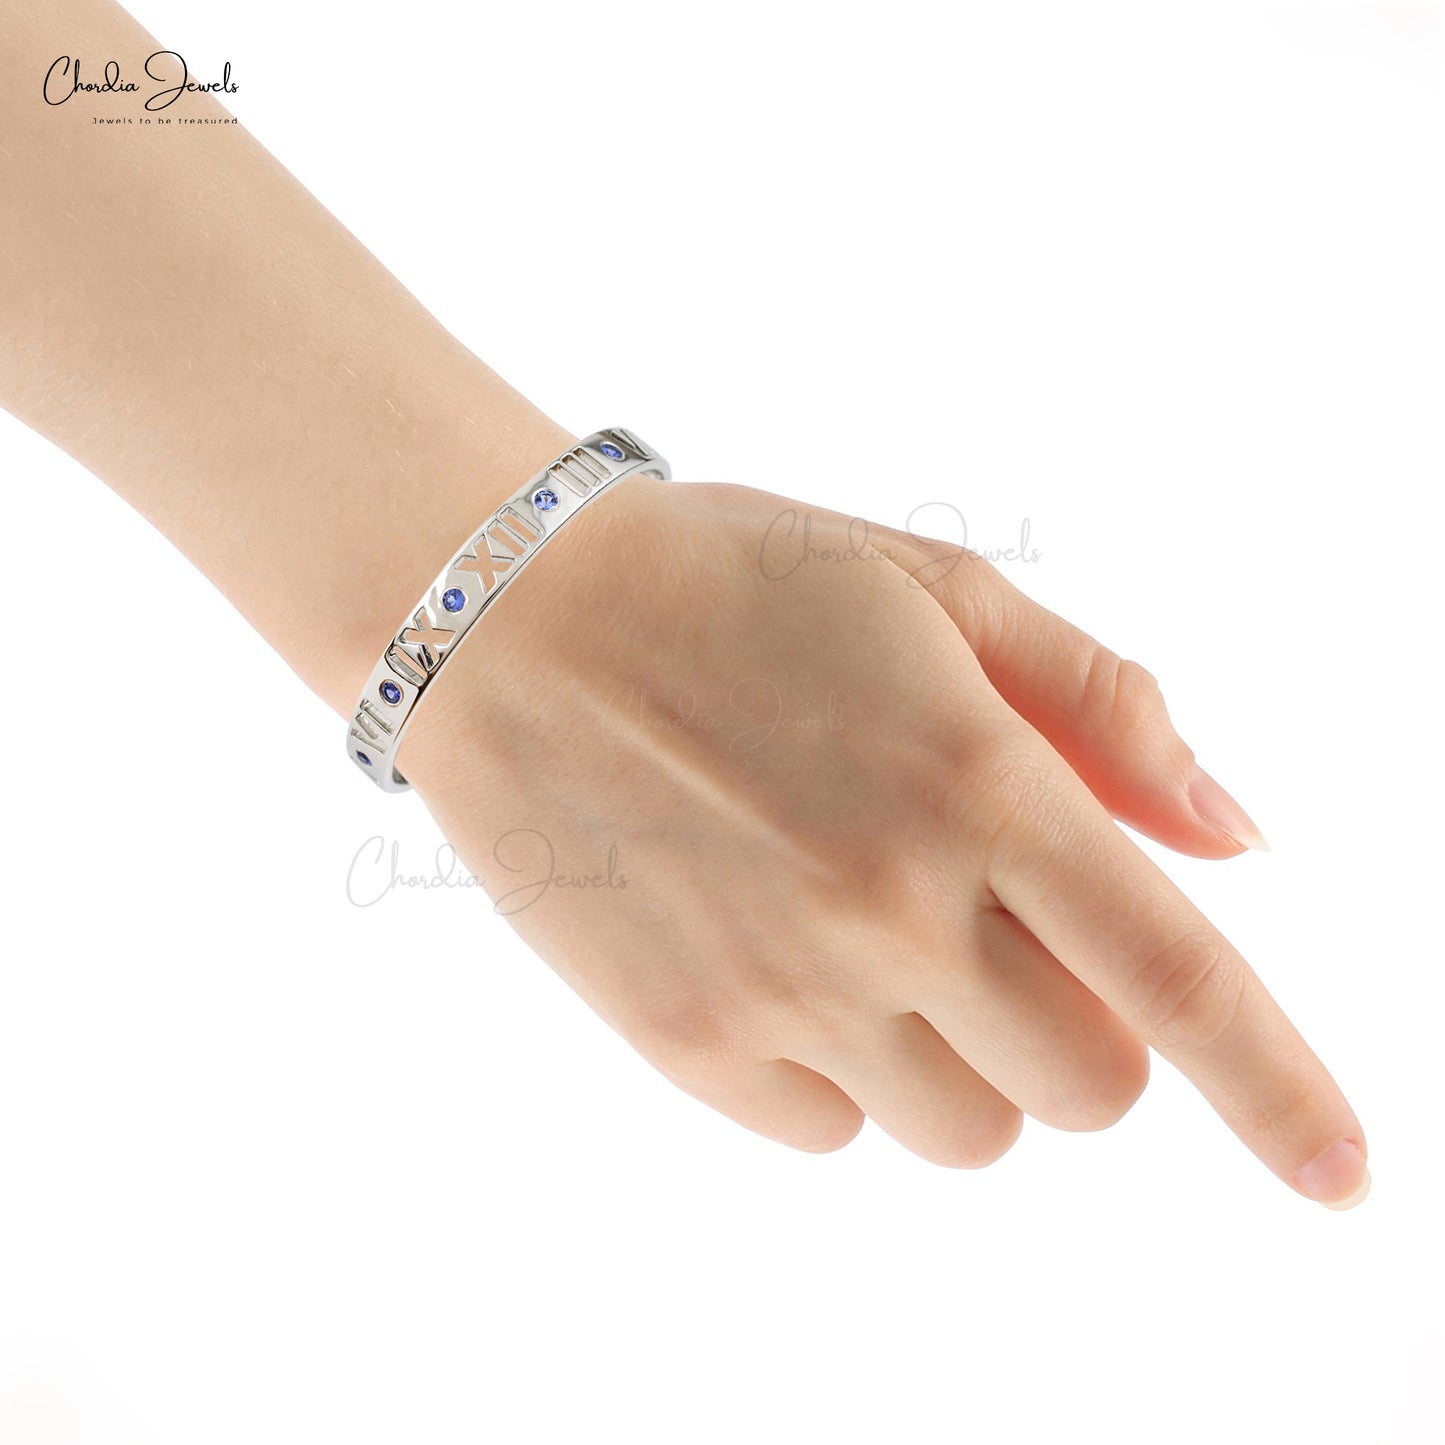 925 Sterling Silver Fixed Bracelet In Genuine Tanzanite Gemstone Jewelry Top Quality At Wholesale Price